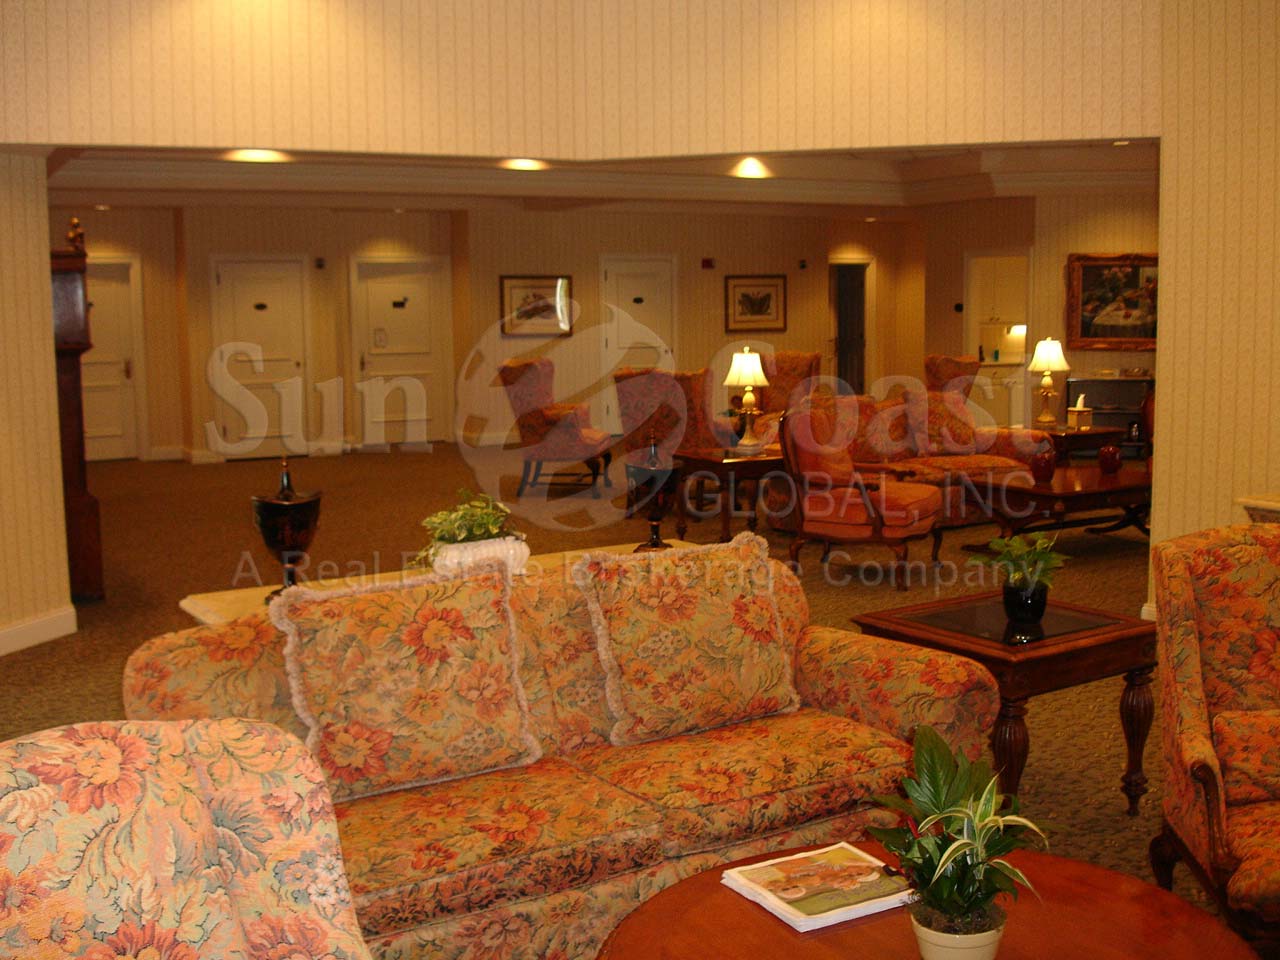 The Cove - Assisted Living Facility